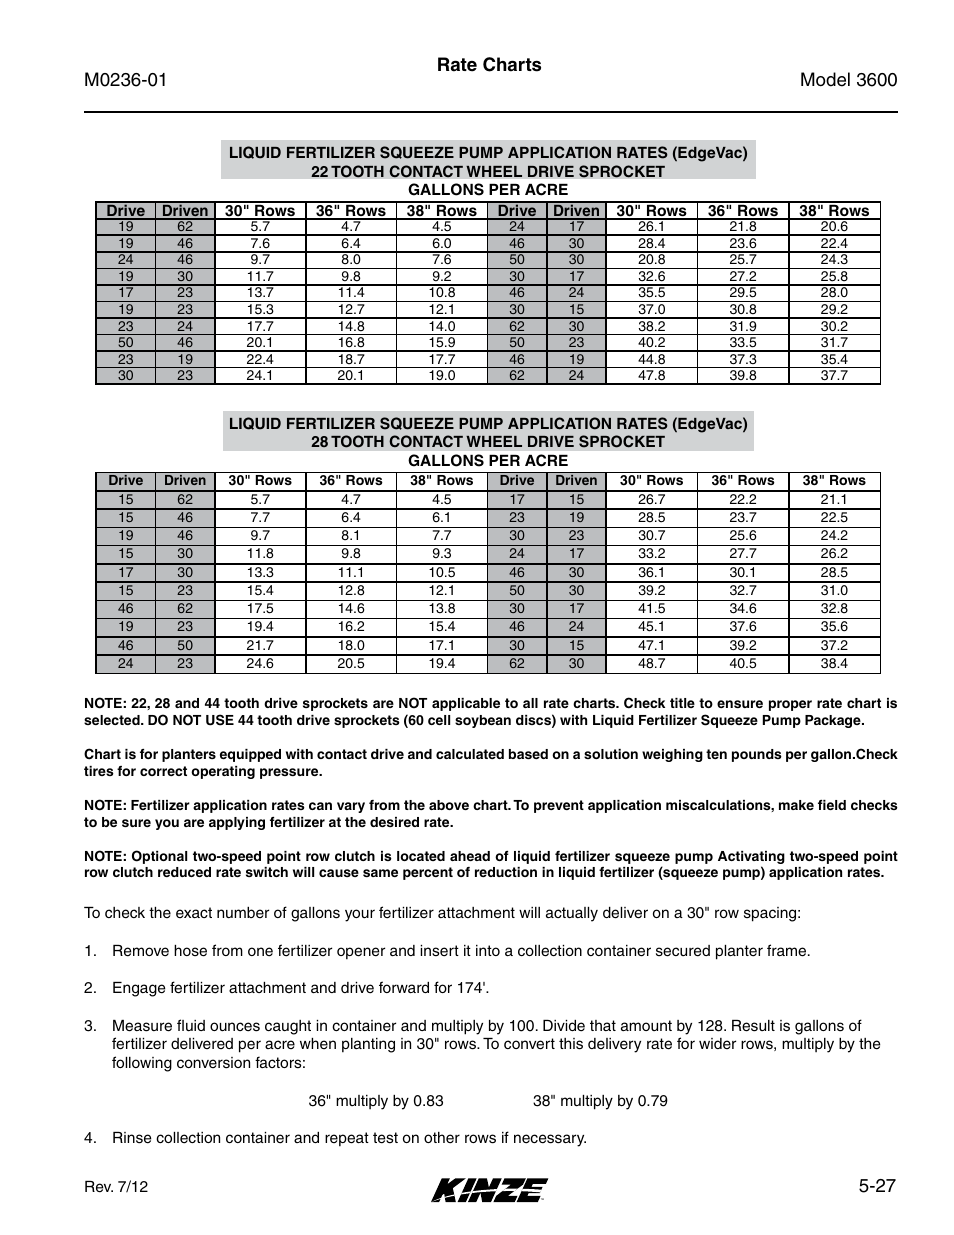 27 rate charts | Kinze 3600 Lift and Rotate Planter Rev. 7/14 User Manual | Page 105 / 172